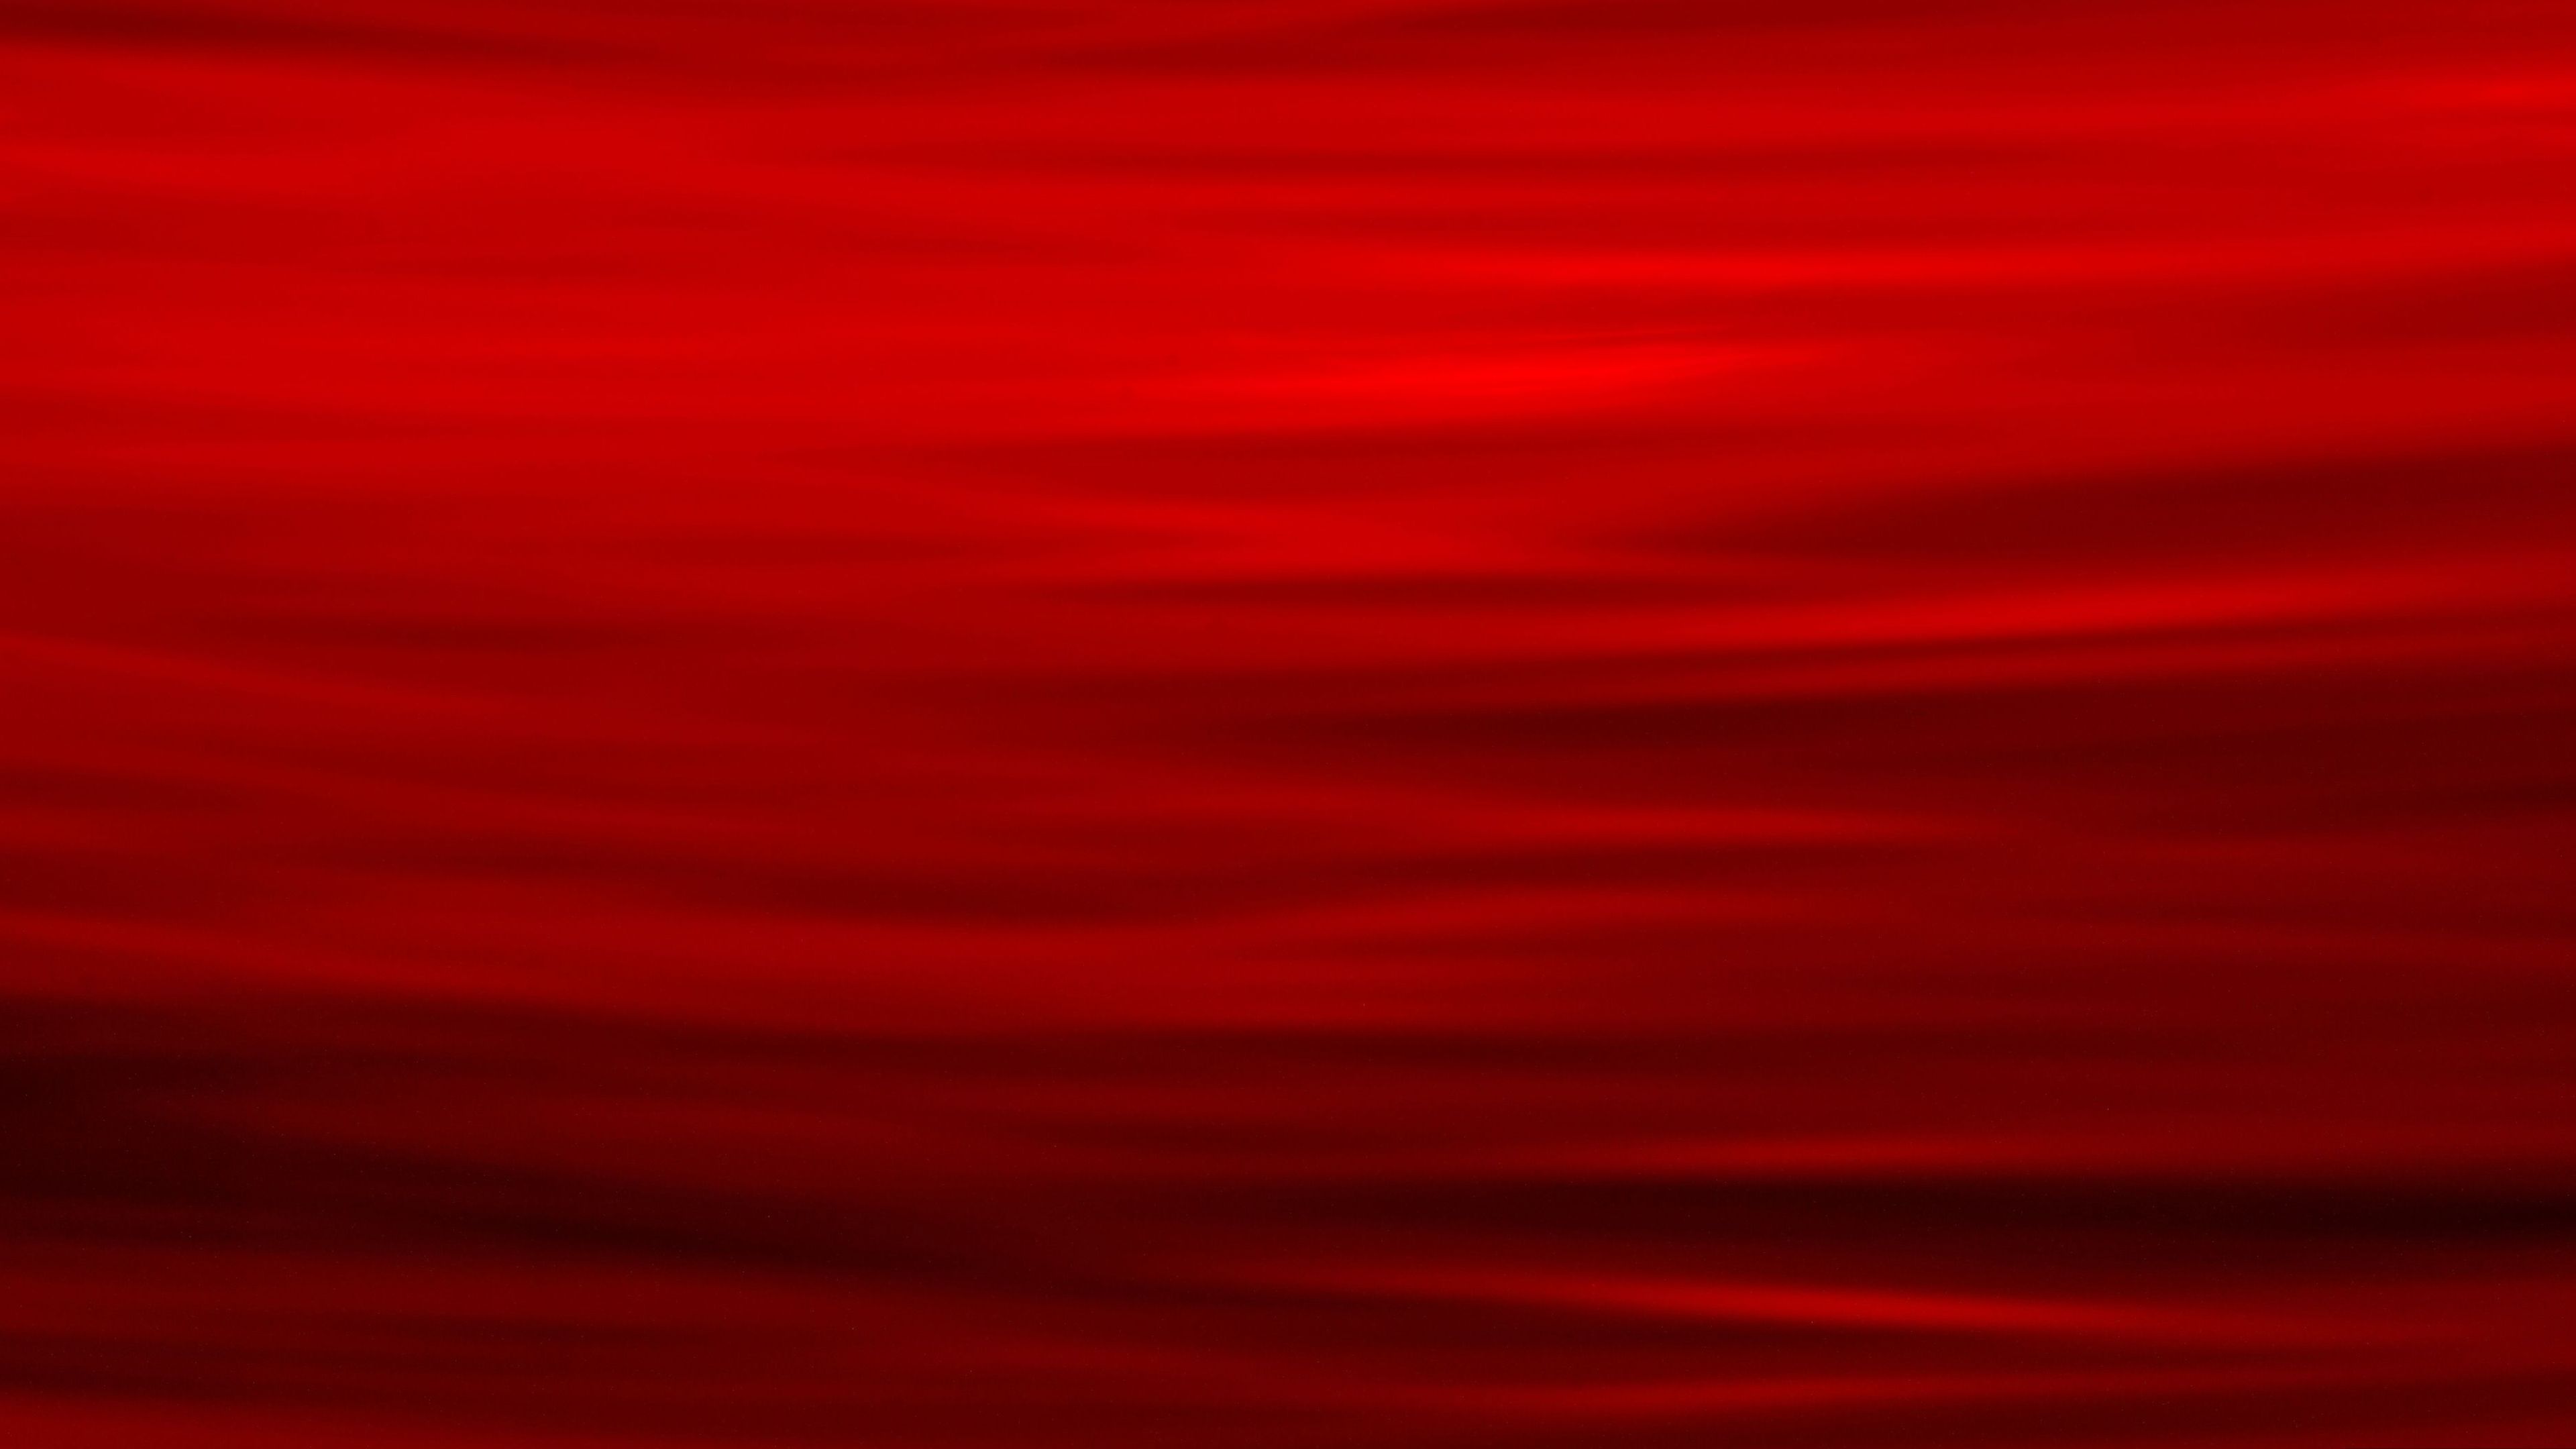 Red and black abstract wallpaper - Dark red